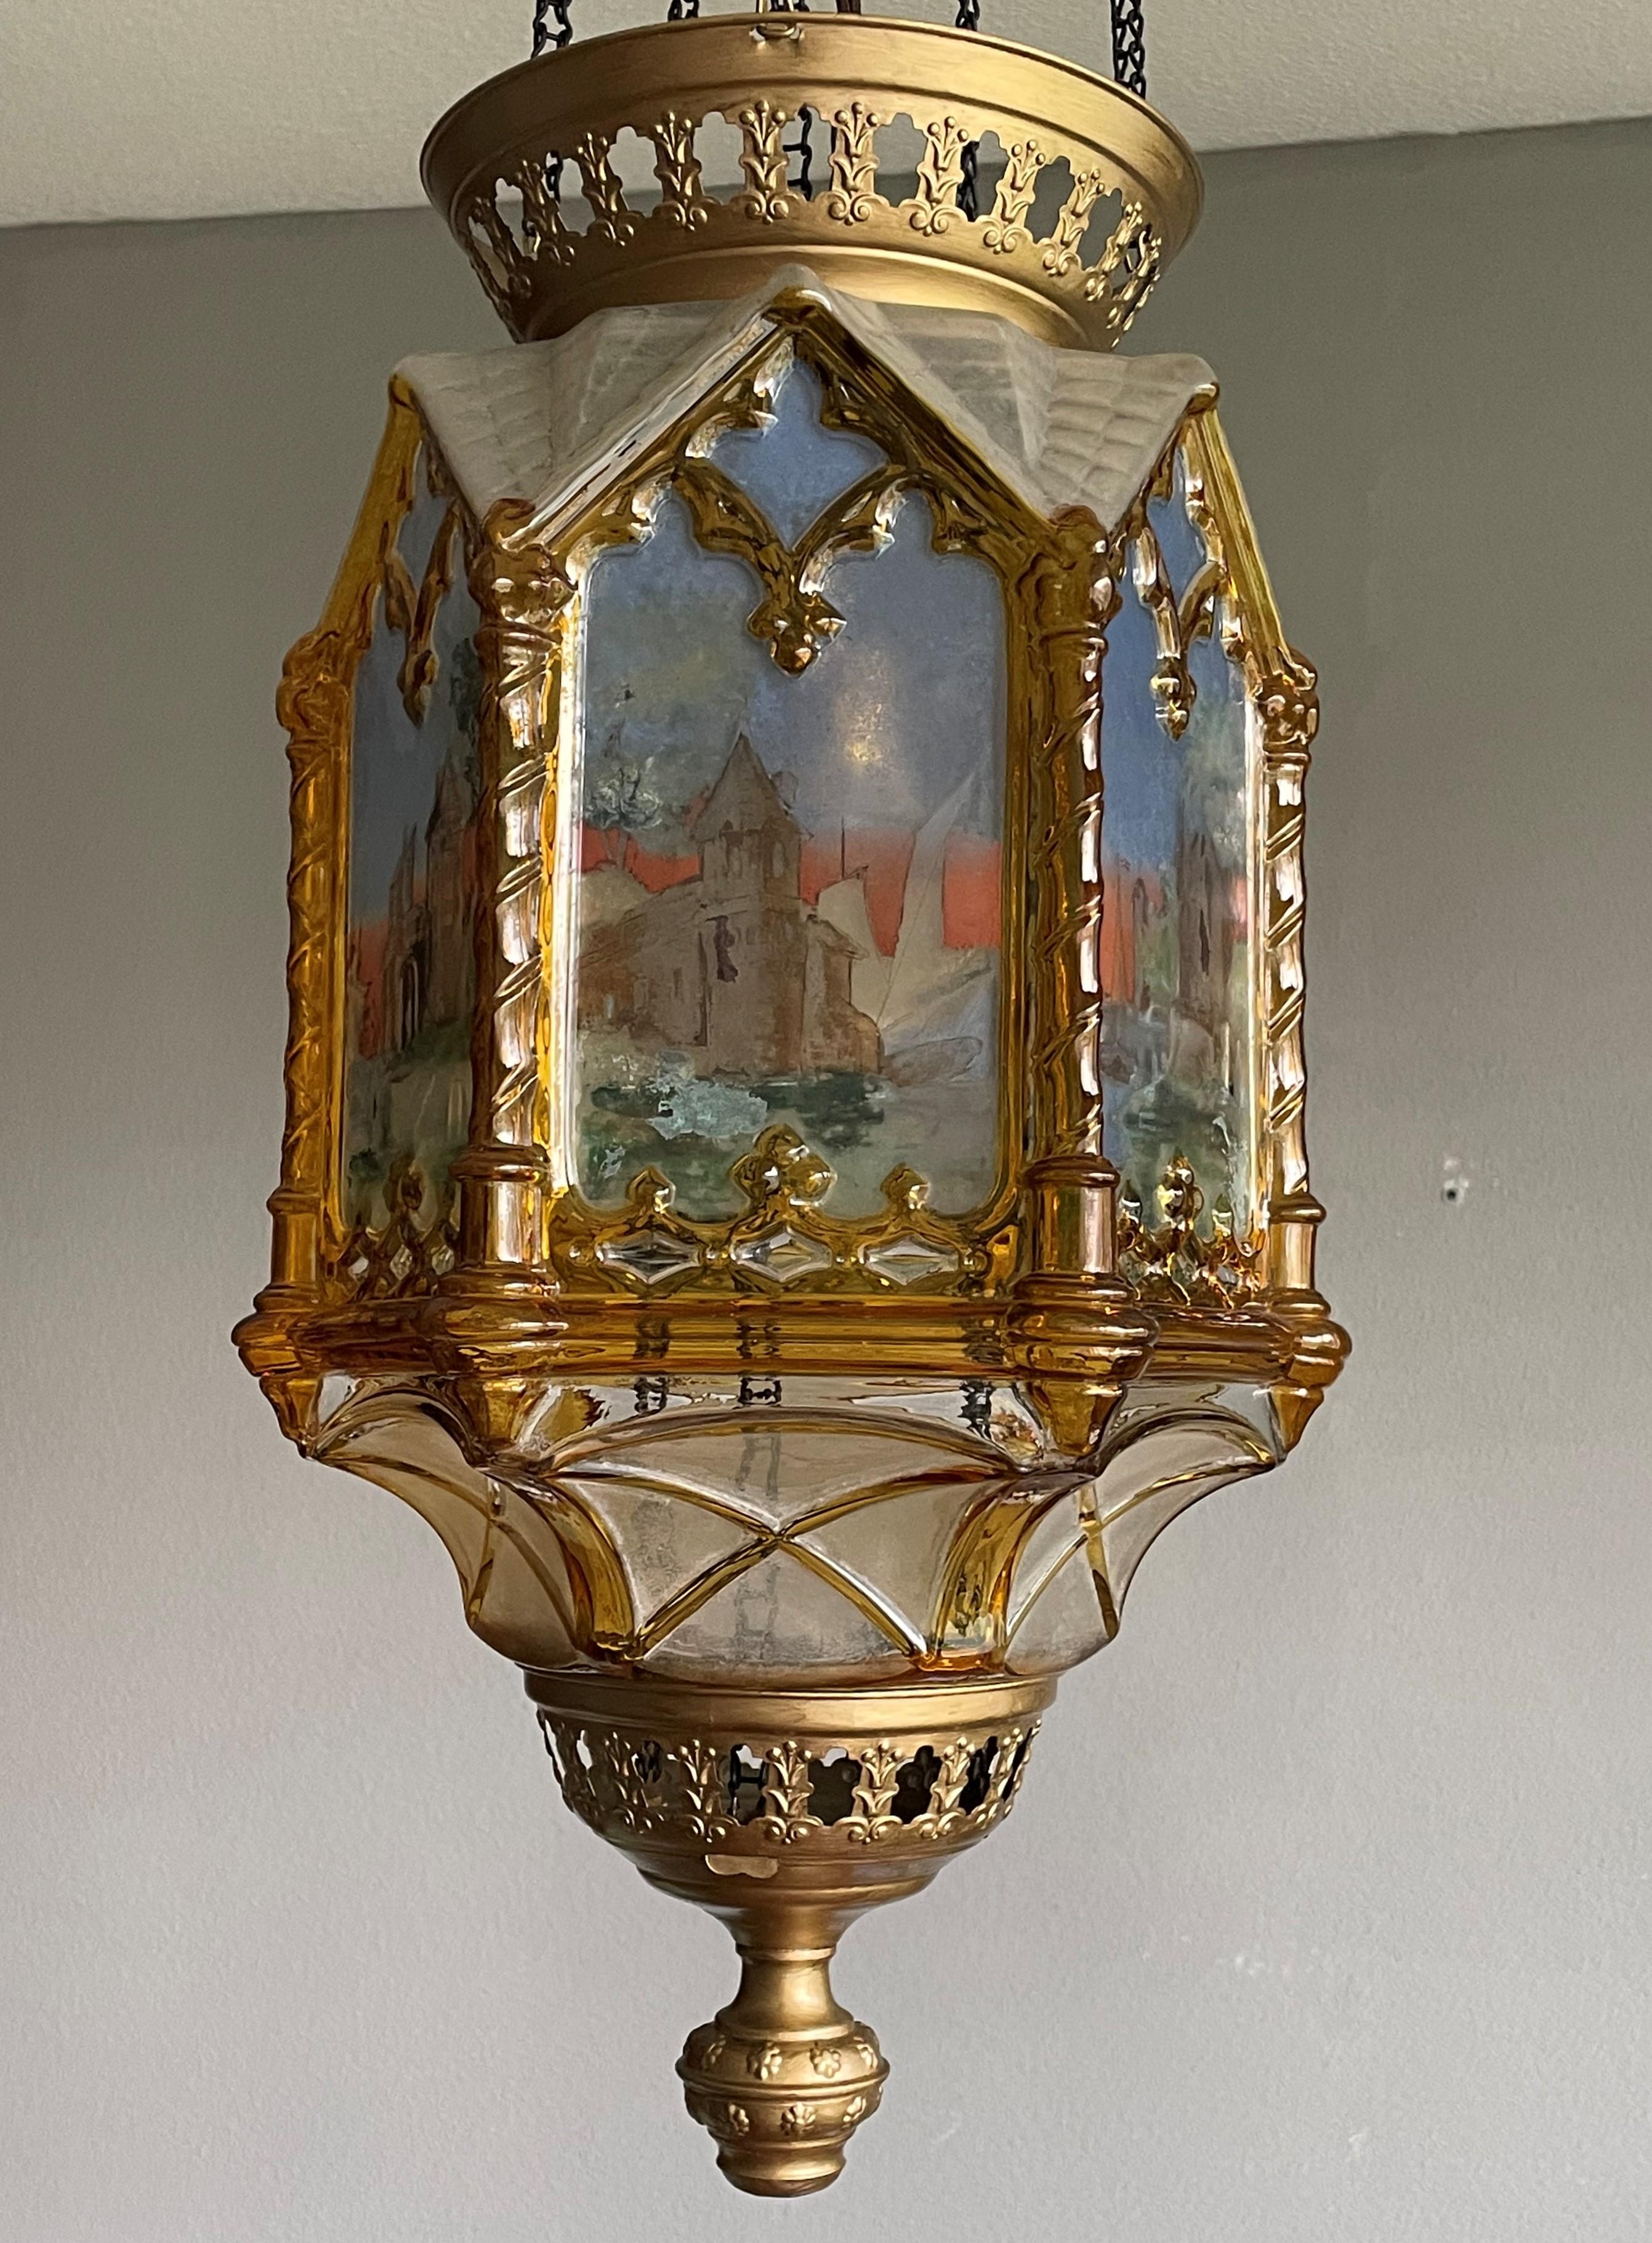 European Gothic Revival Medieval Style, Hand Painted Amber Color Glass Lantern / Pendant